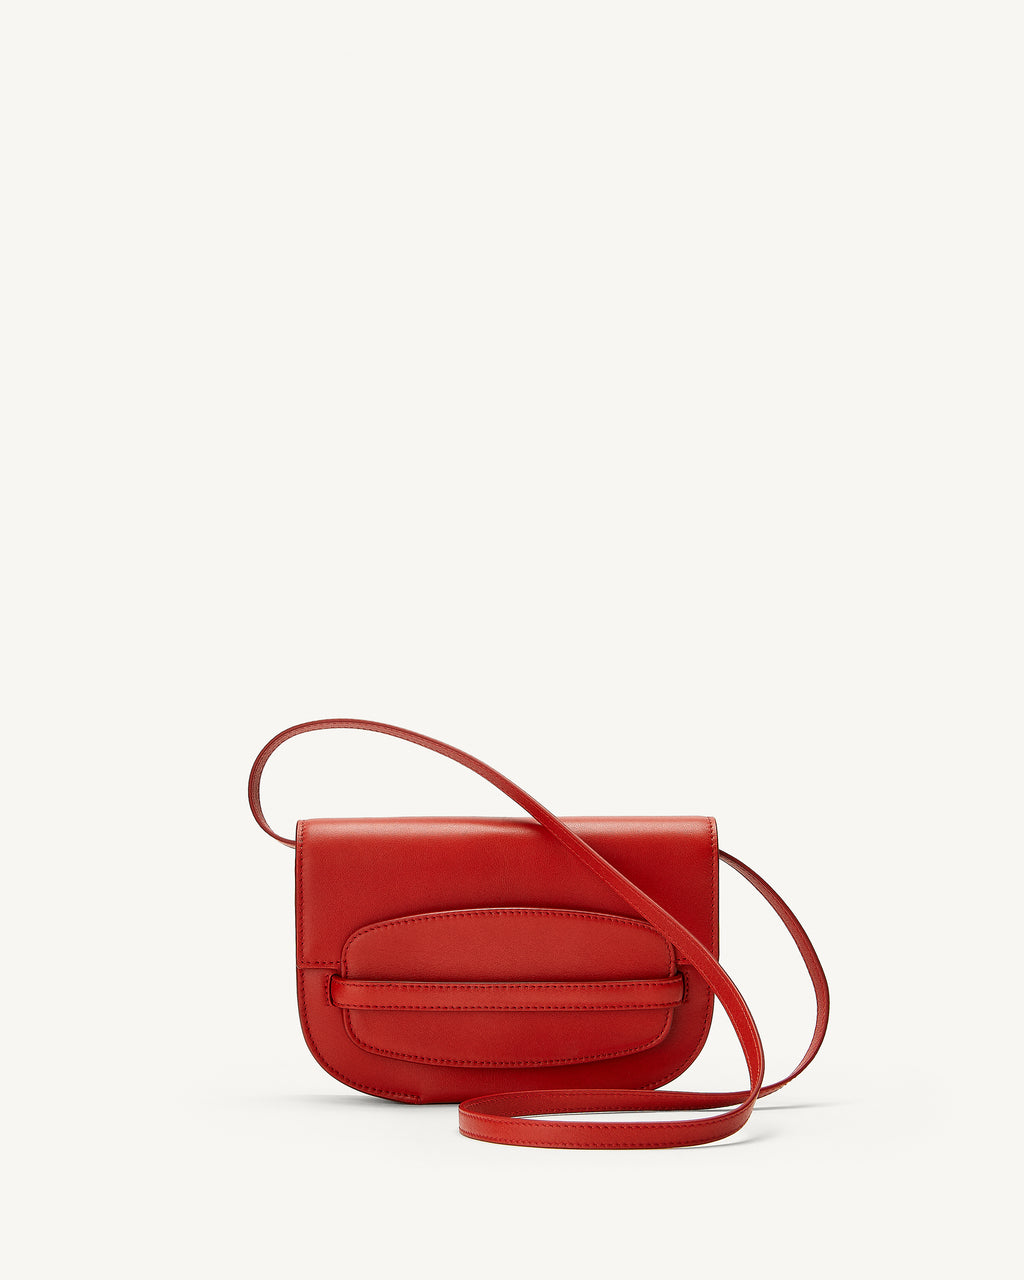 Sport Convertible Clutch in Rouge Leather